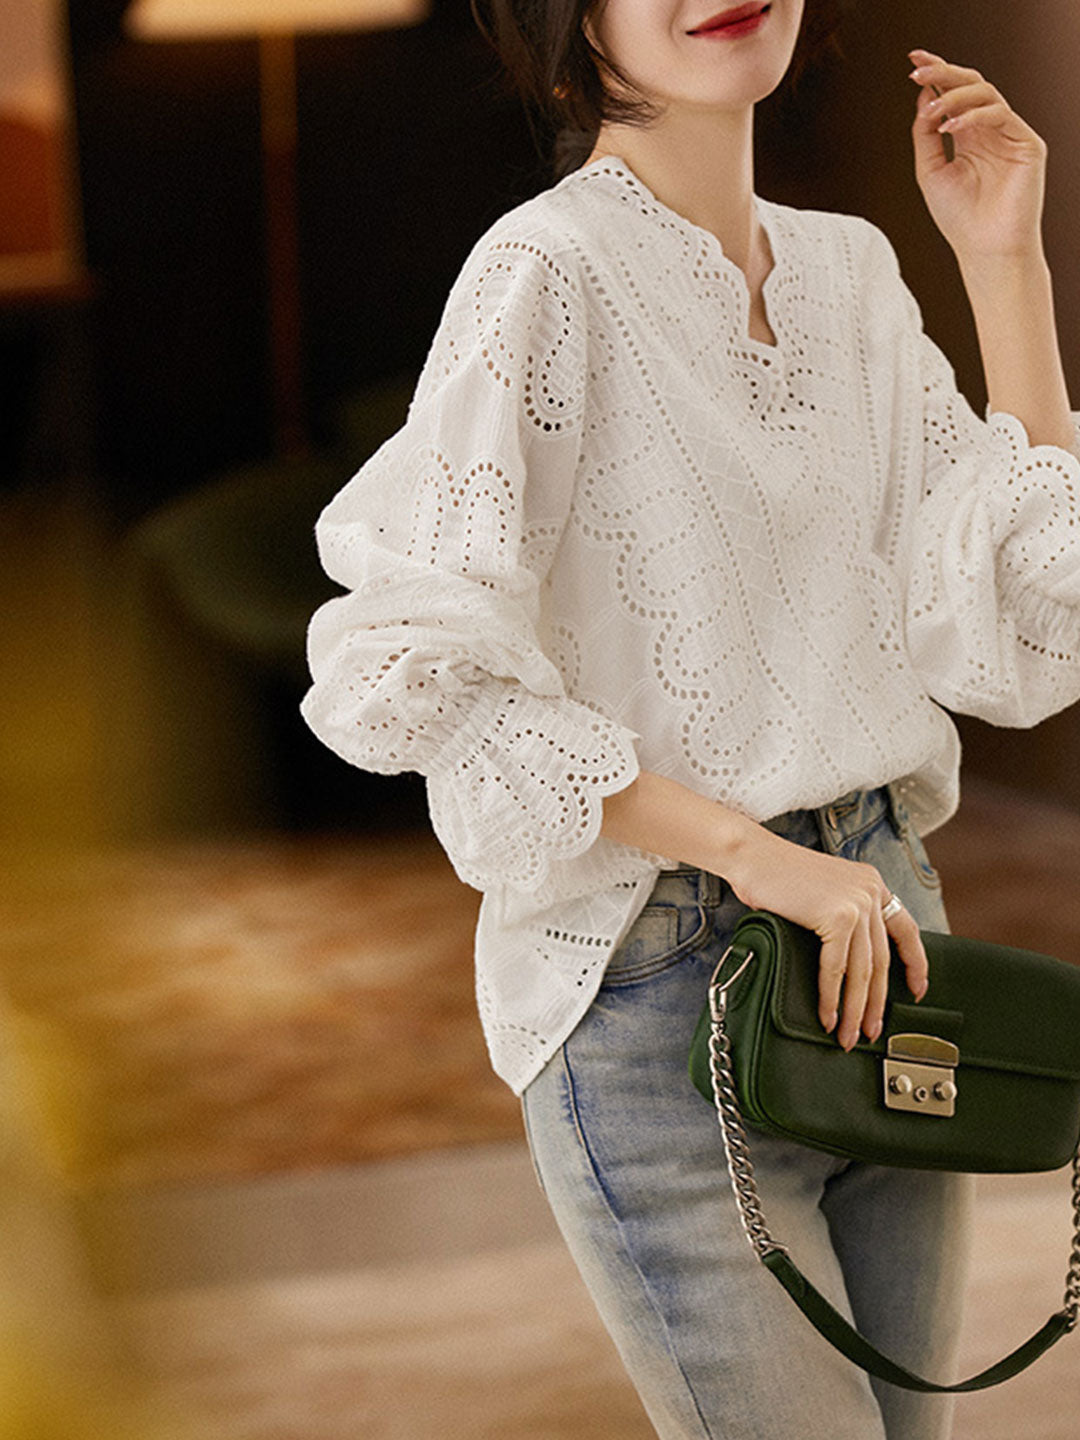 Hannah Retro Hollow Embroidered Blouse